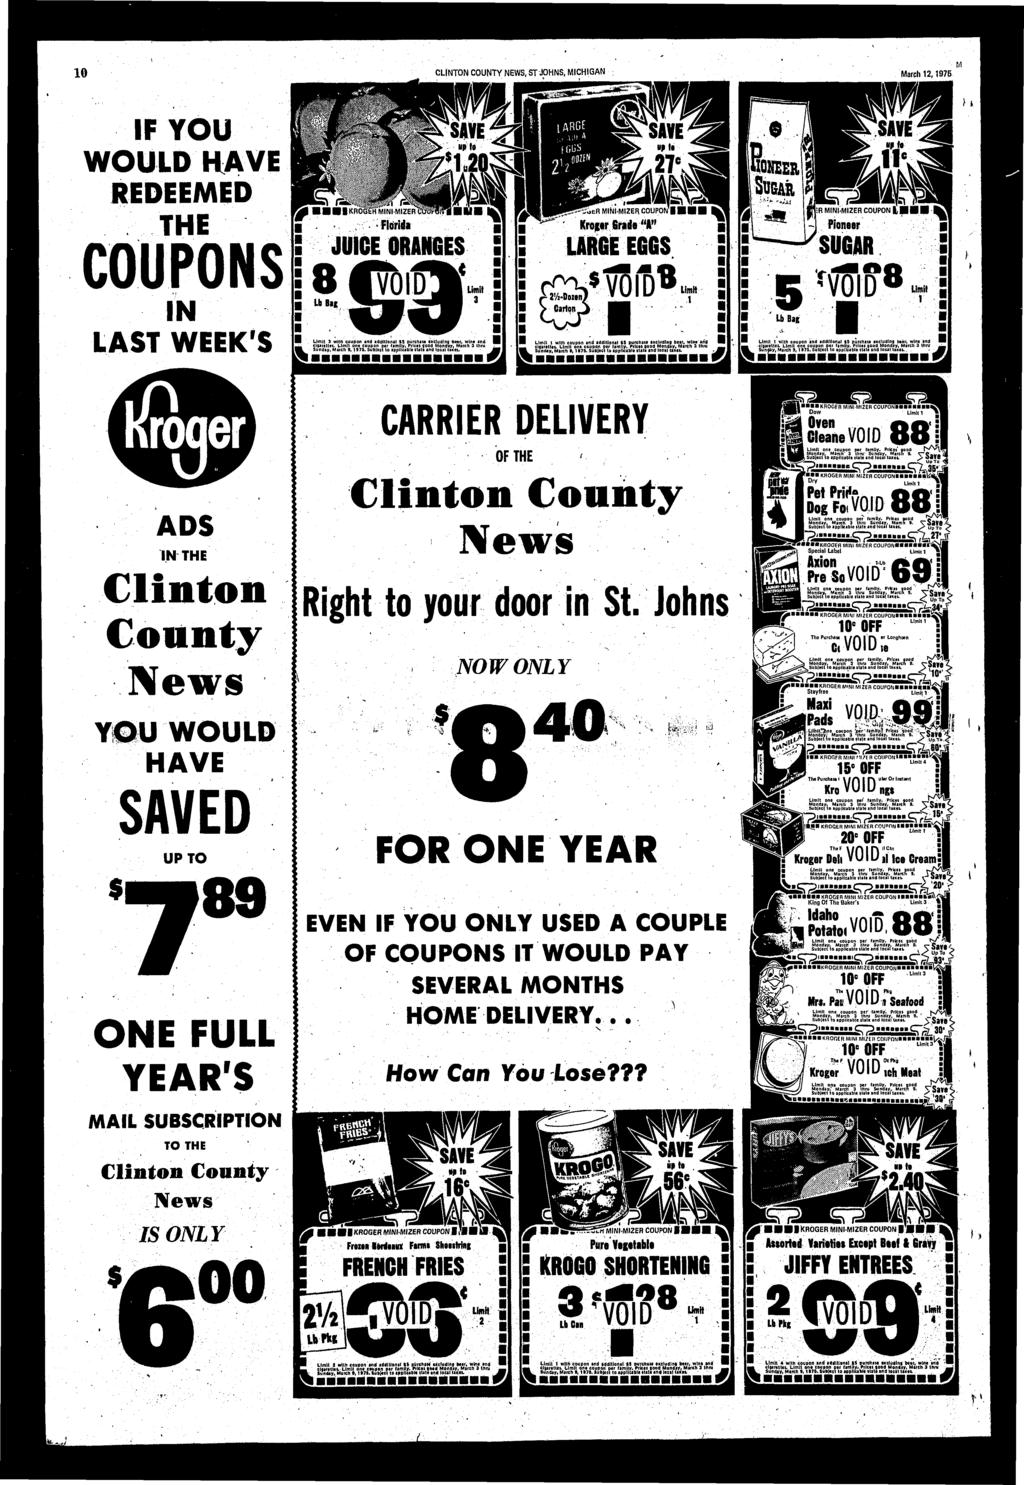 0 CLNTON COUNTY NEWS, ST JOHNS, MCHGAN March 2,975 M u F YOU WOULD HAVE REDEEMED THE COUPONS N LAST WEEKS JUCE ORANGES Lmt 3 wth coupon and addtonal S3 prcrate excludng beer, wlnt and clgaralte.